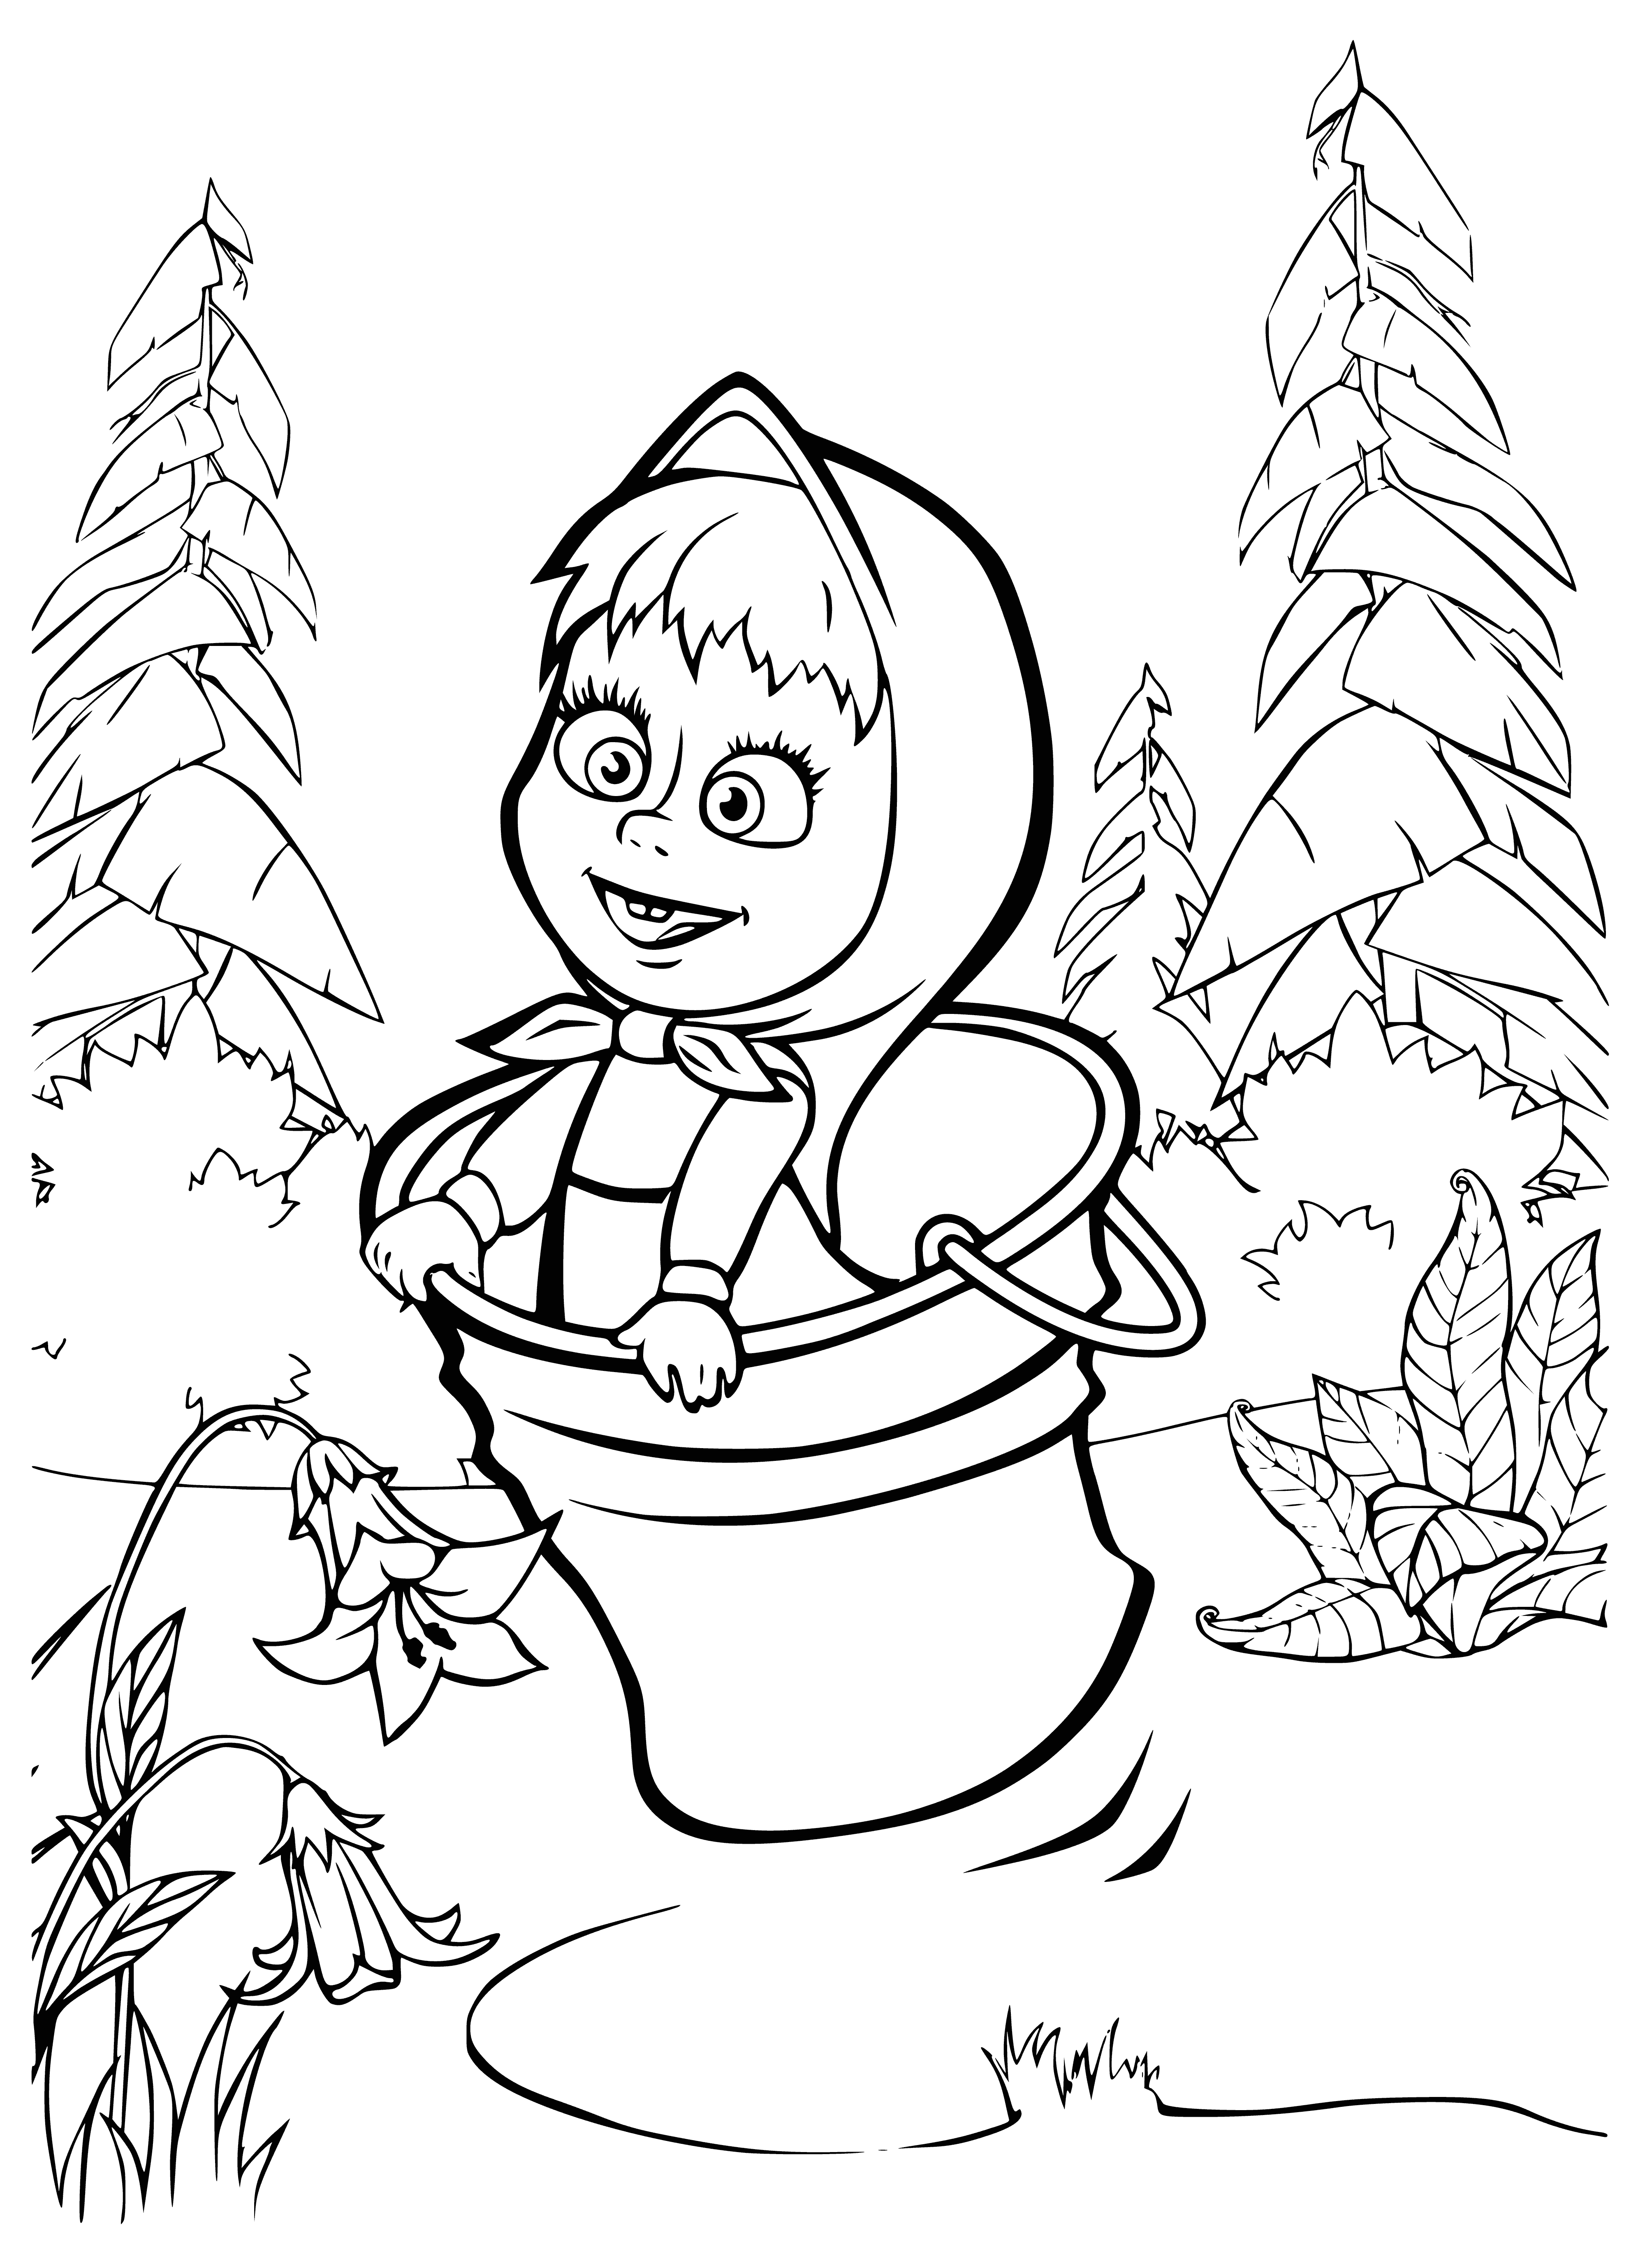 coloring page: Masha jumps in a bucket wearing a purple dress and a yellow scarf. #coloringpage